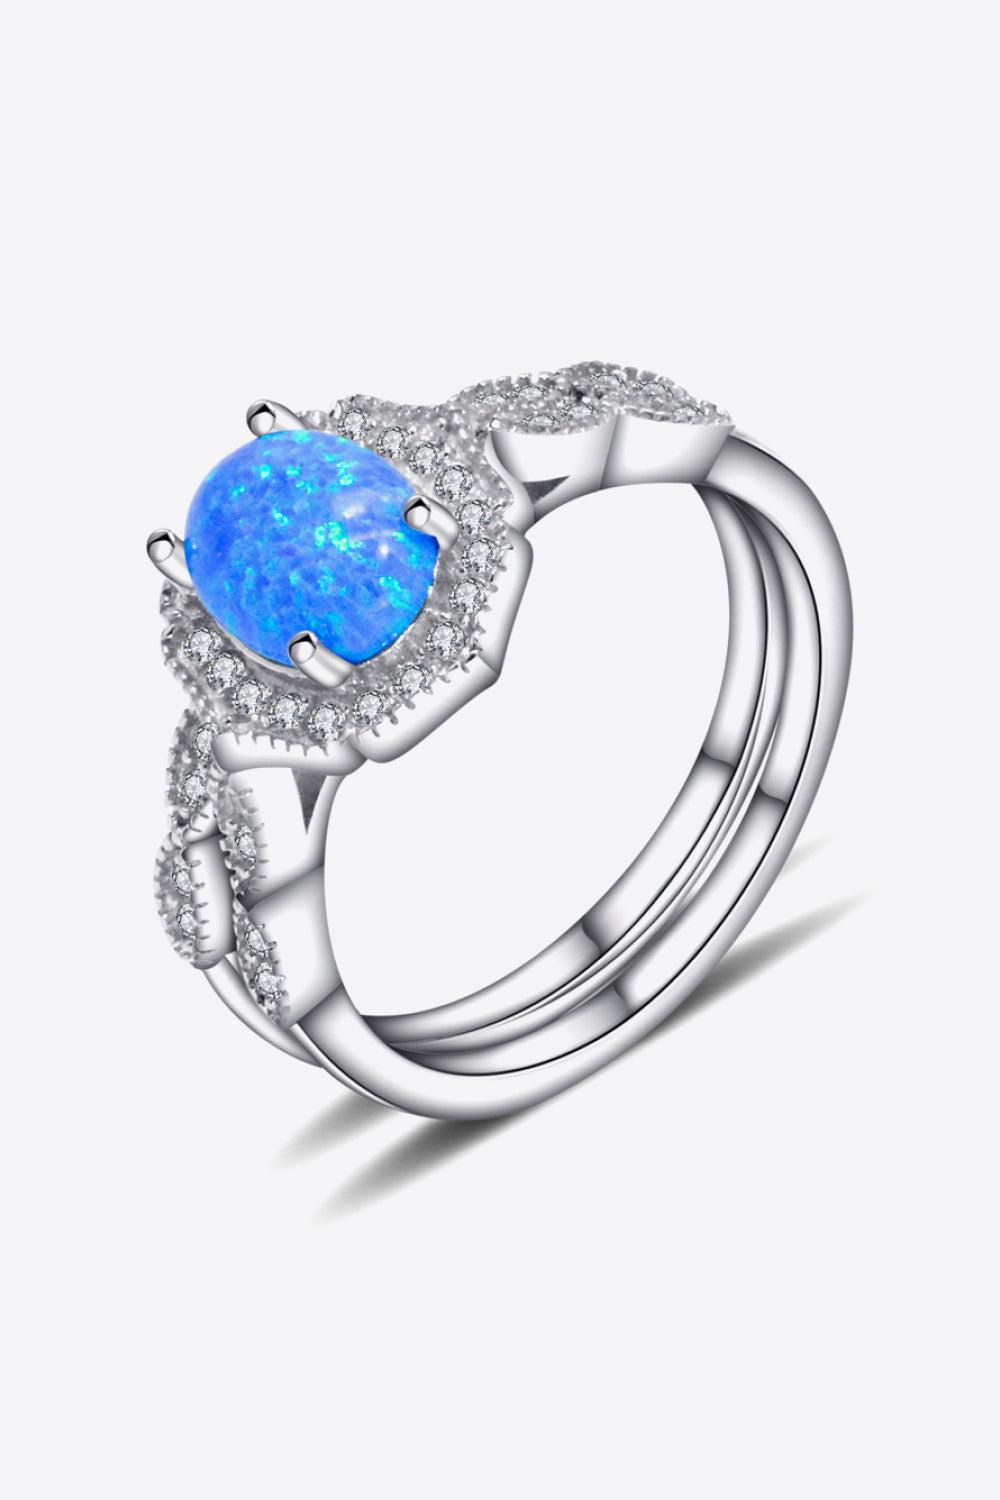 2-Piece 925 Sterling Silver Opal Ring Set BLUE ZONE PLANET